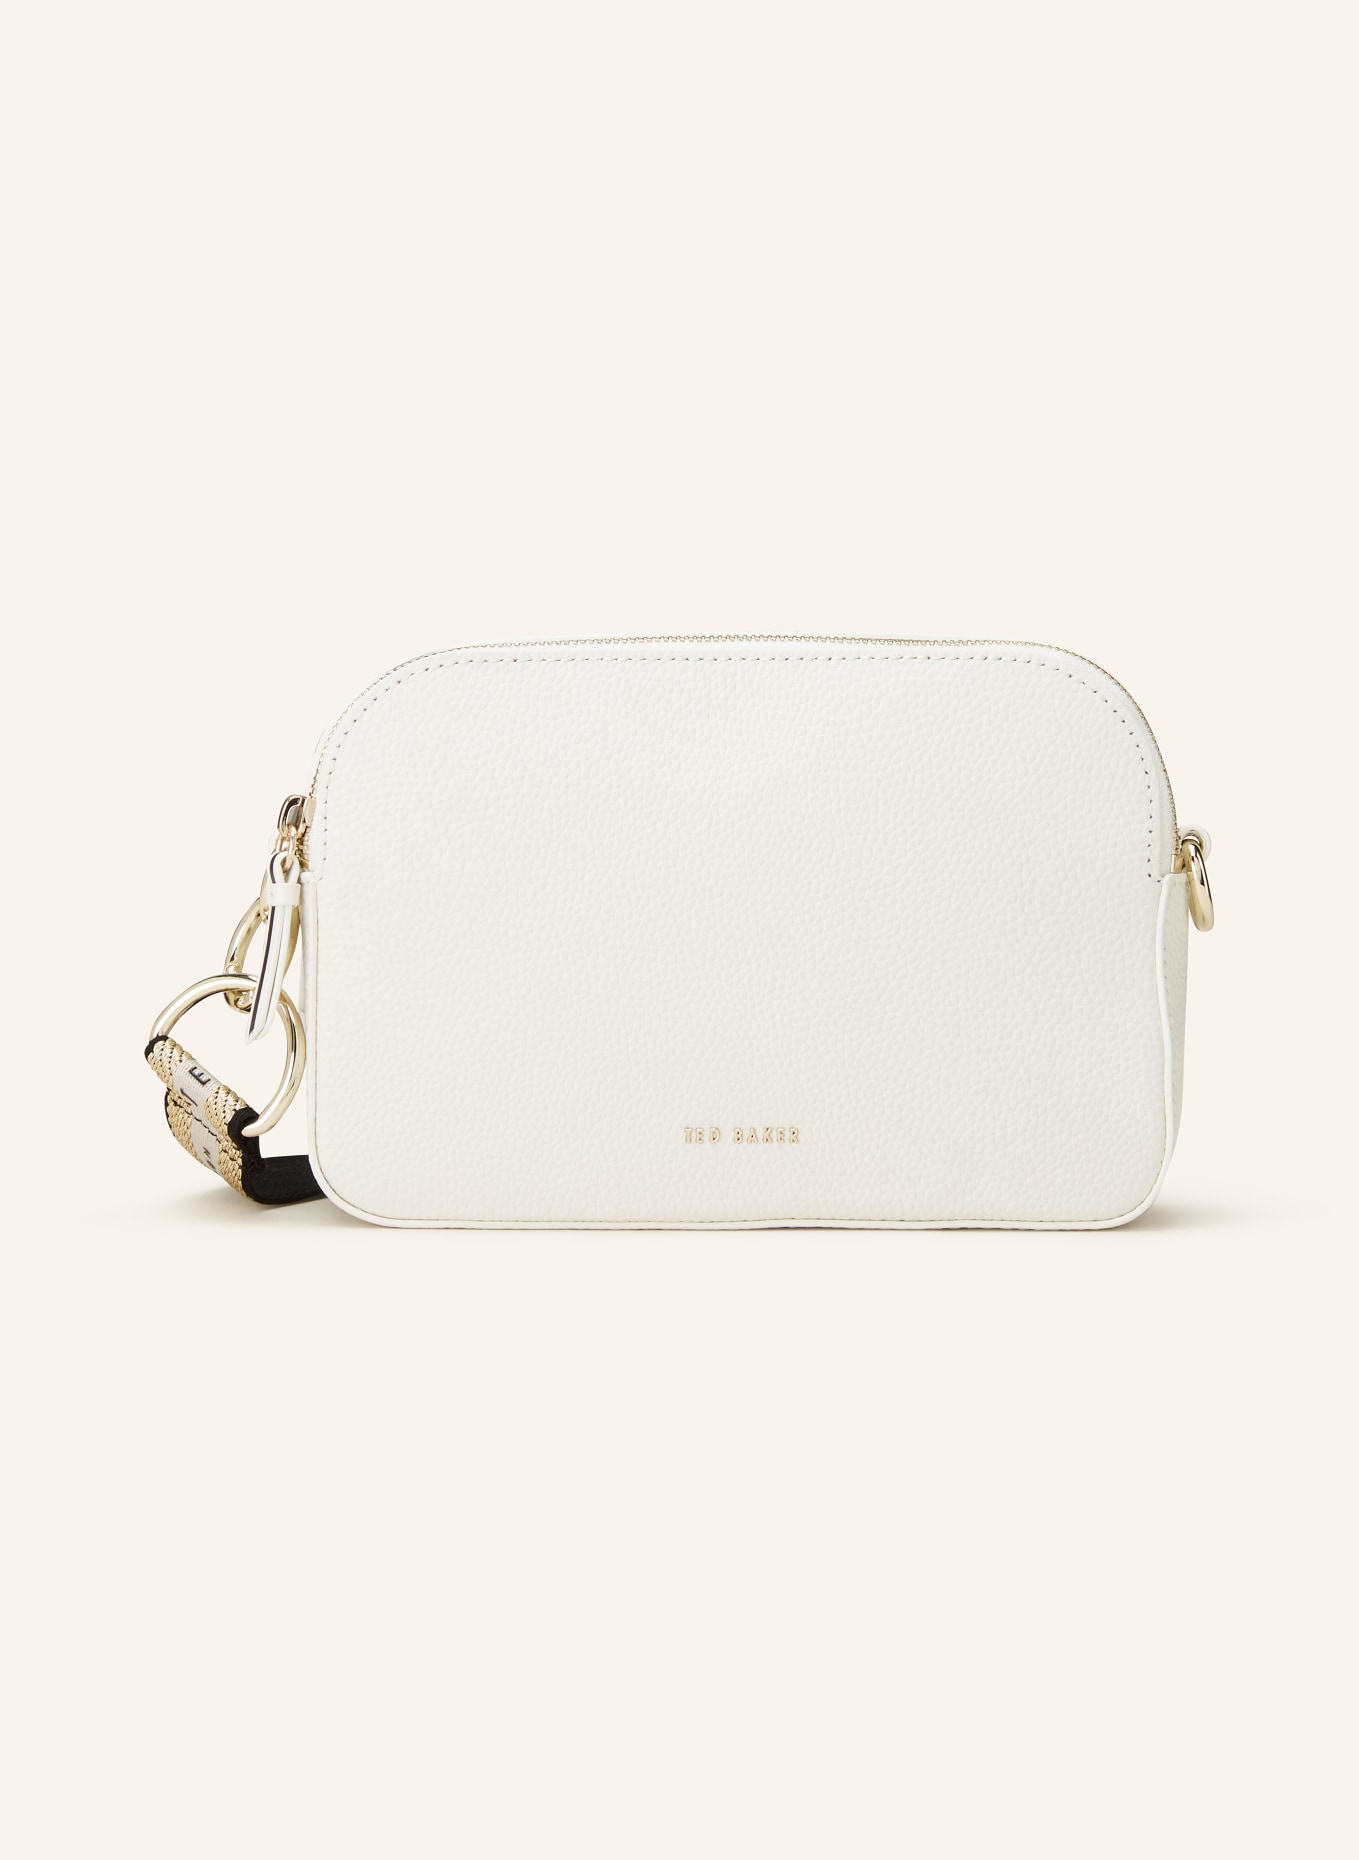 TED BAKER Crossbody bag DAILIAH, Color: WHITE (Image 1)